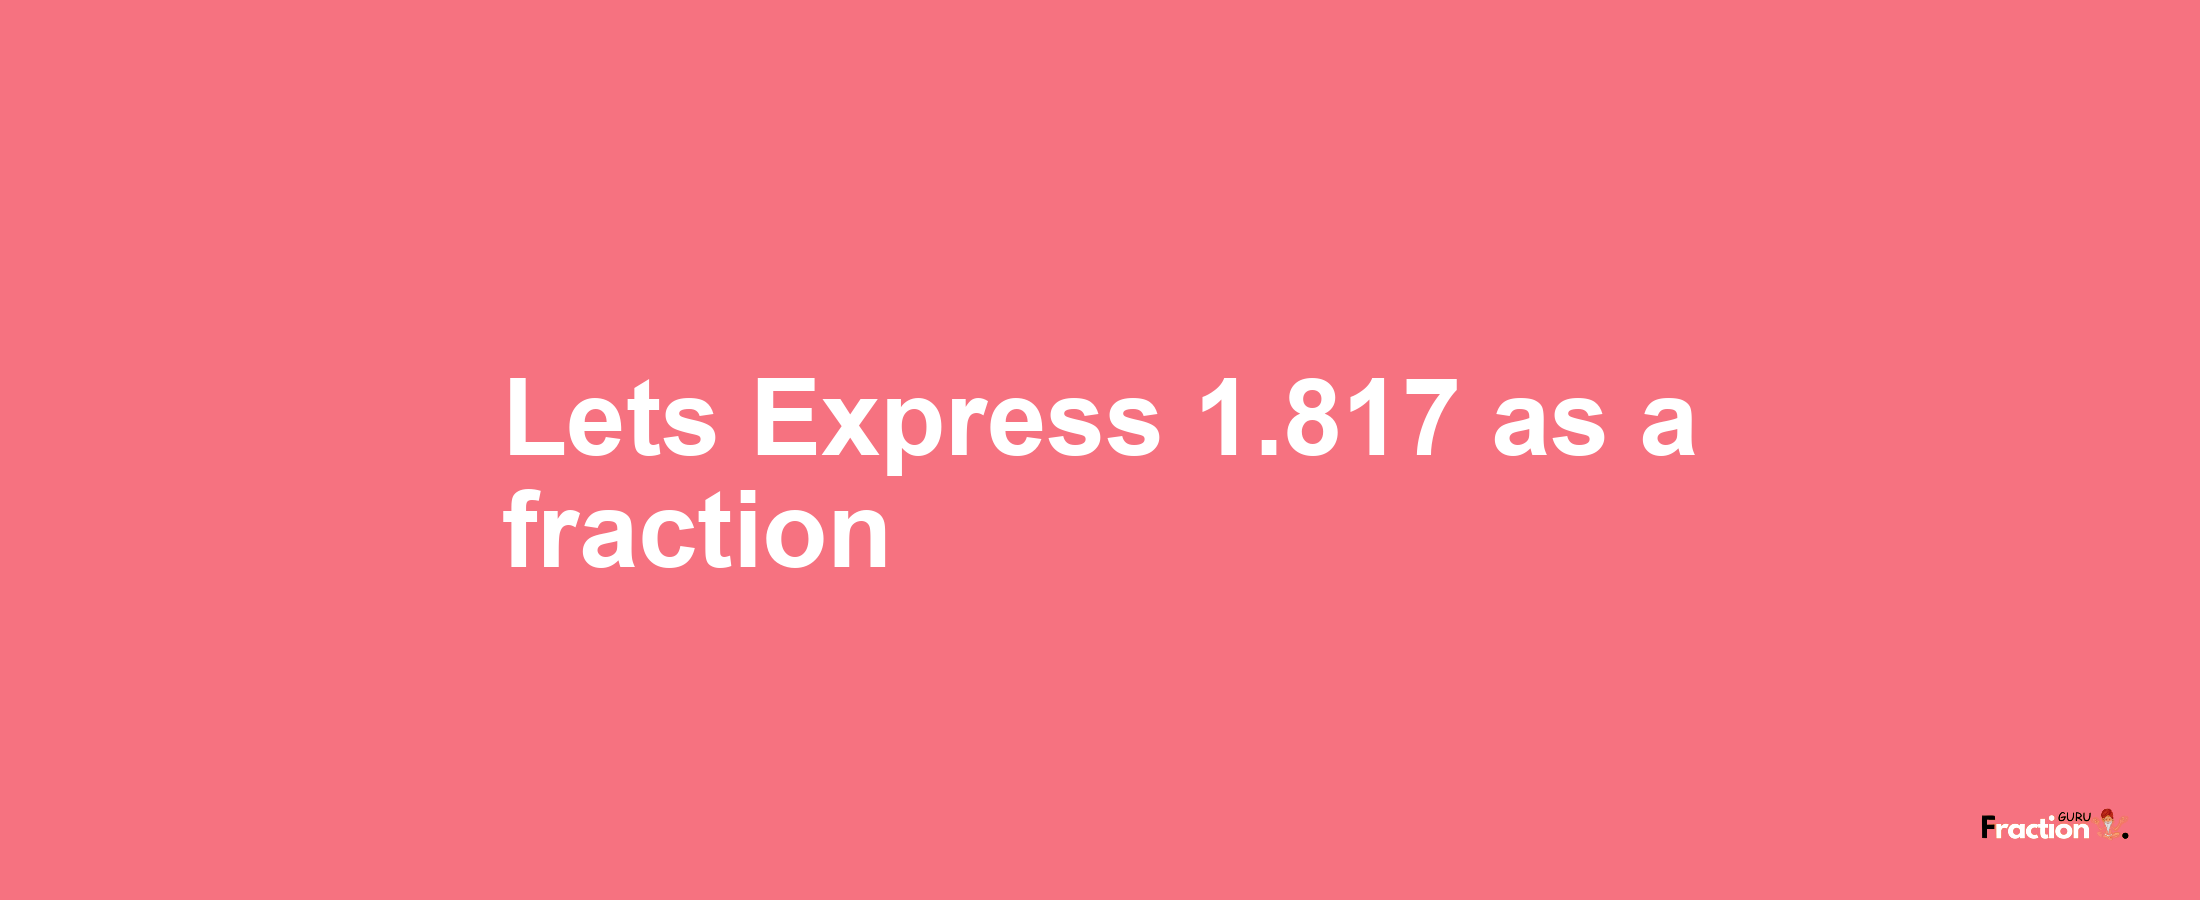 Lets Express 1.817 as afraction